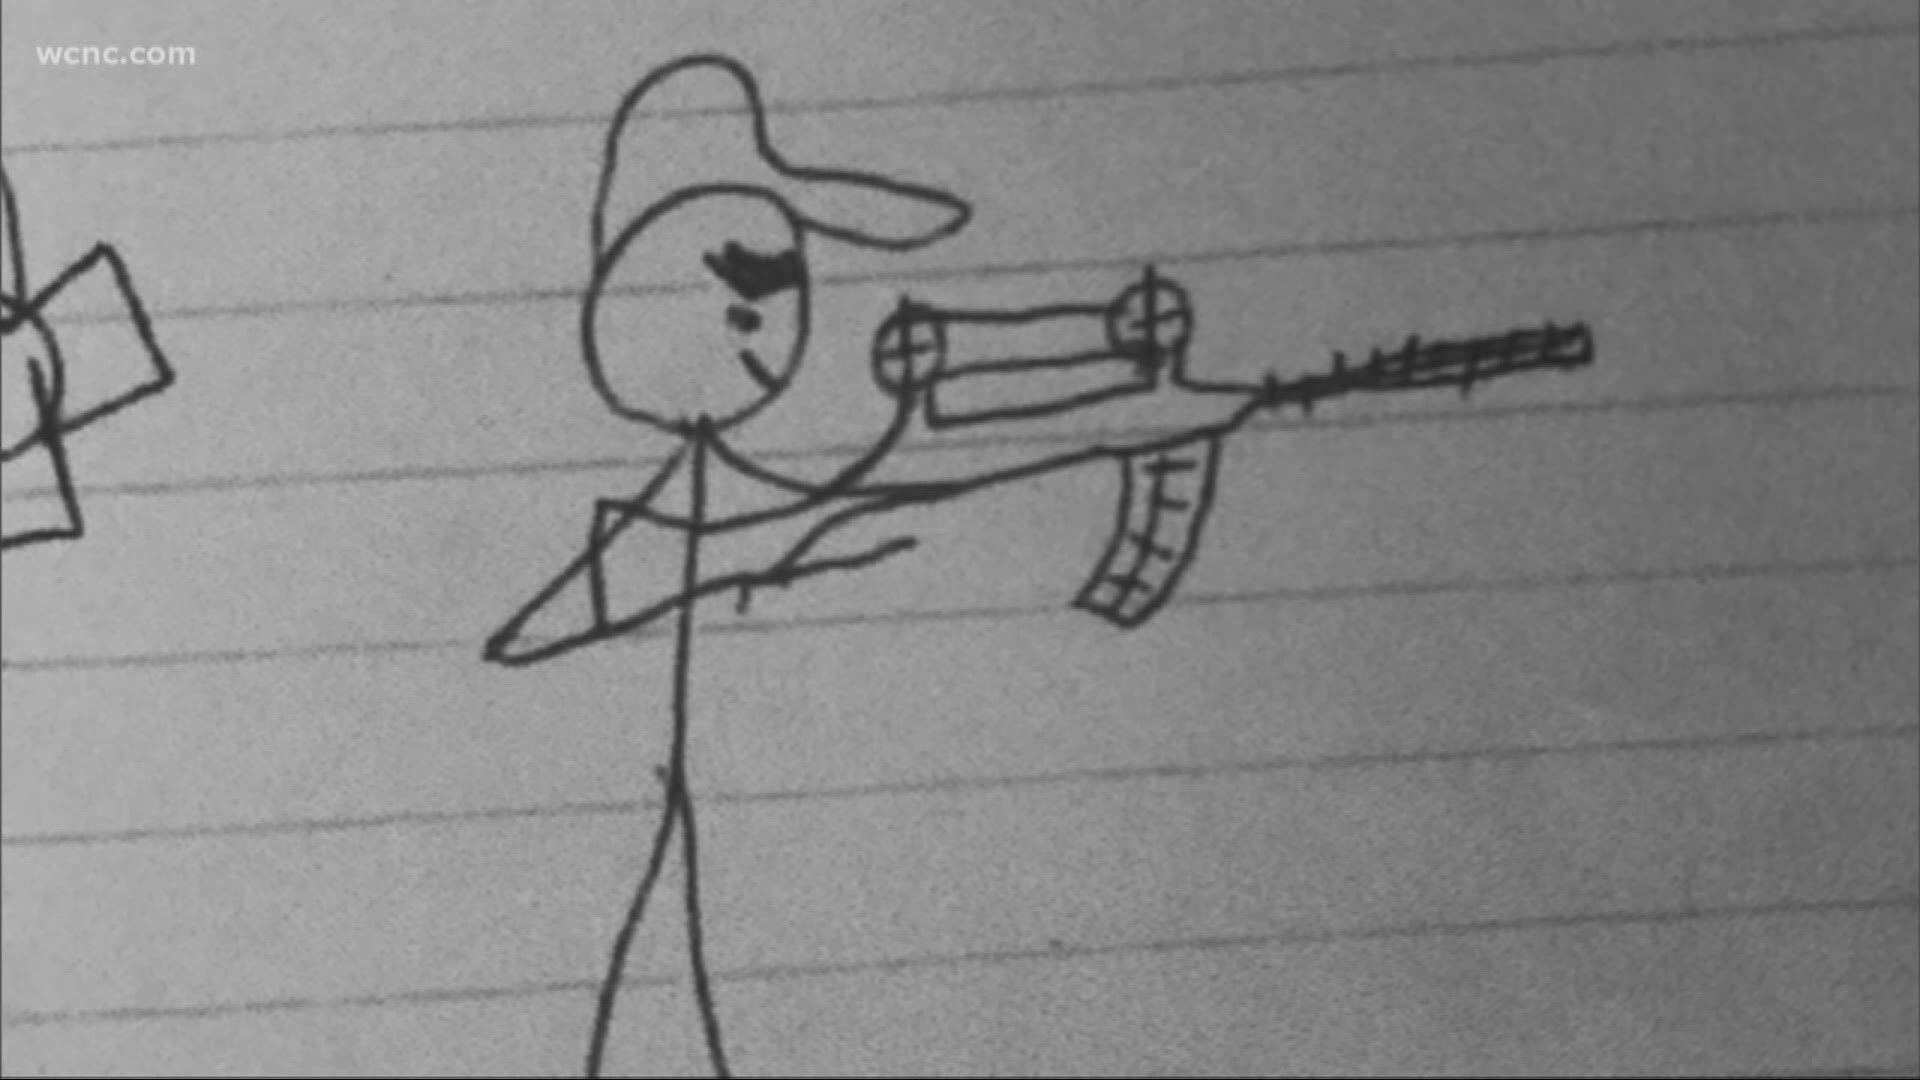 Gun drawing gets student suspended